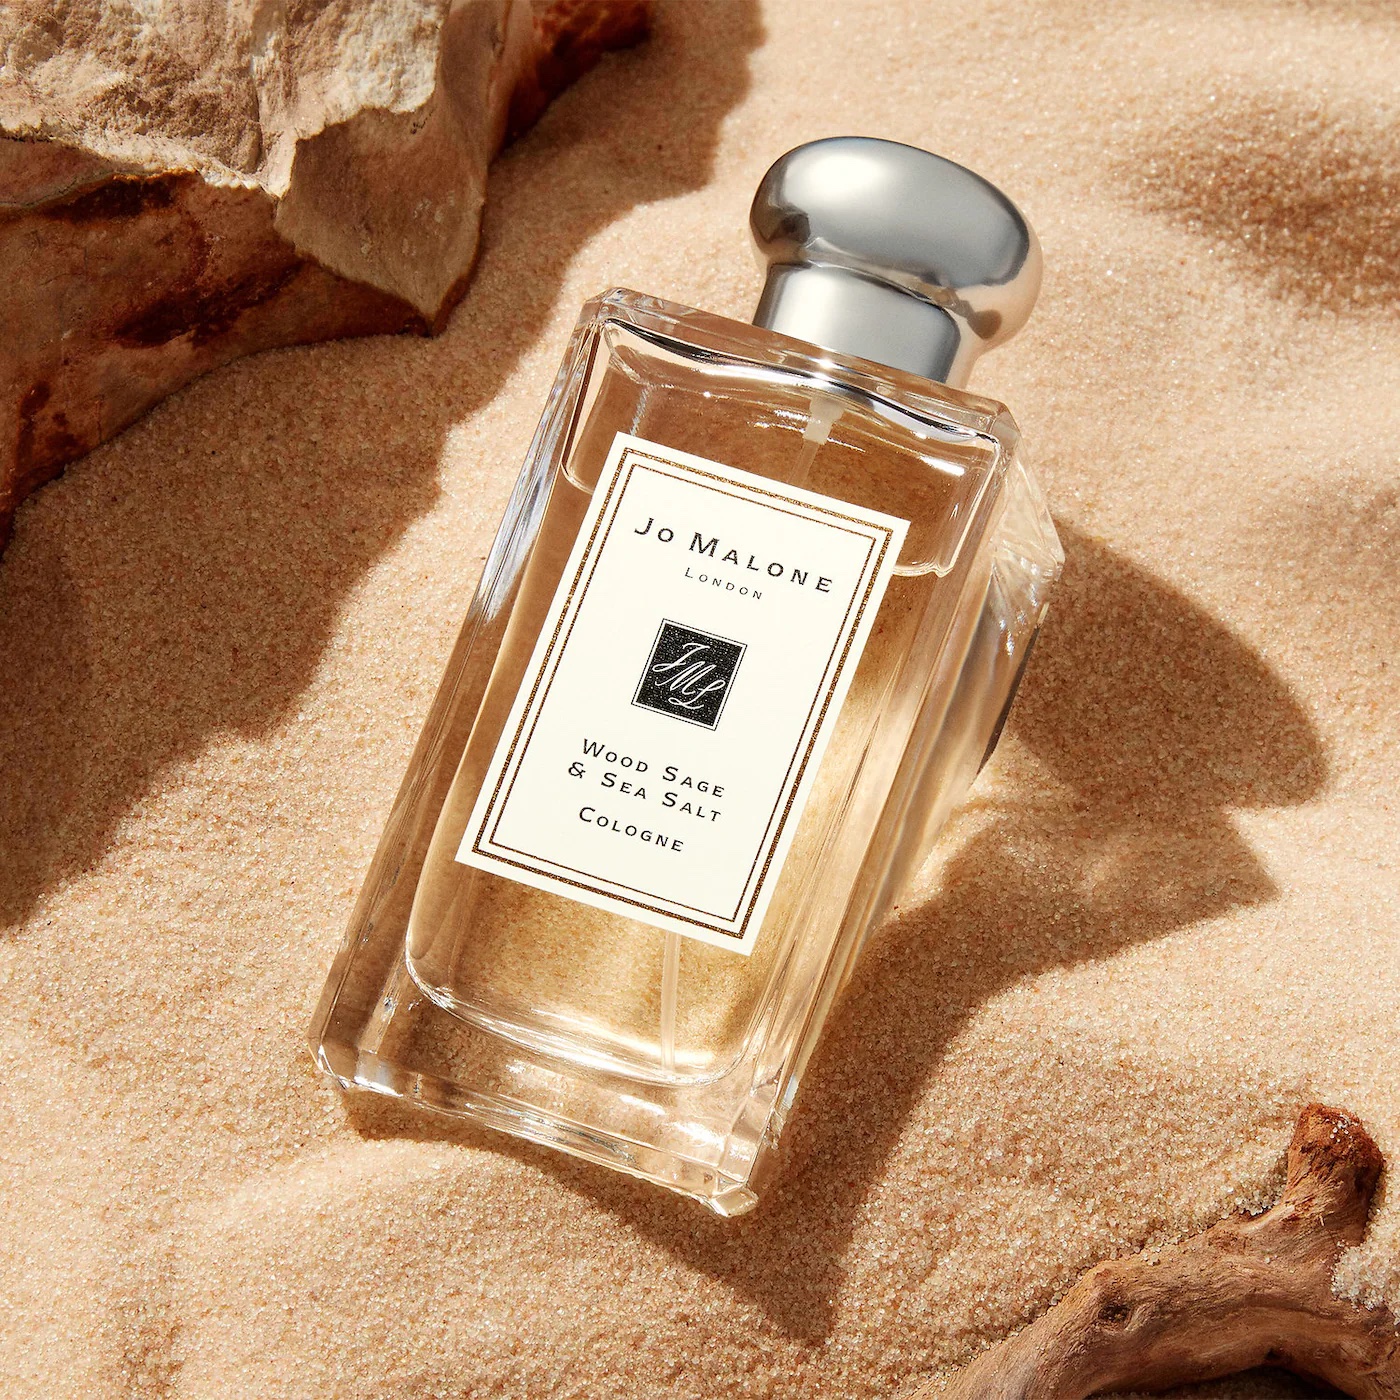 Perfume bottle with white label perched in the sand.